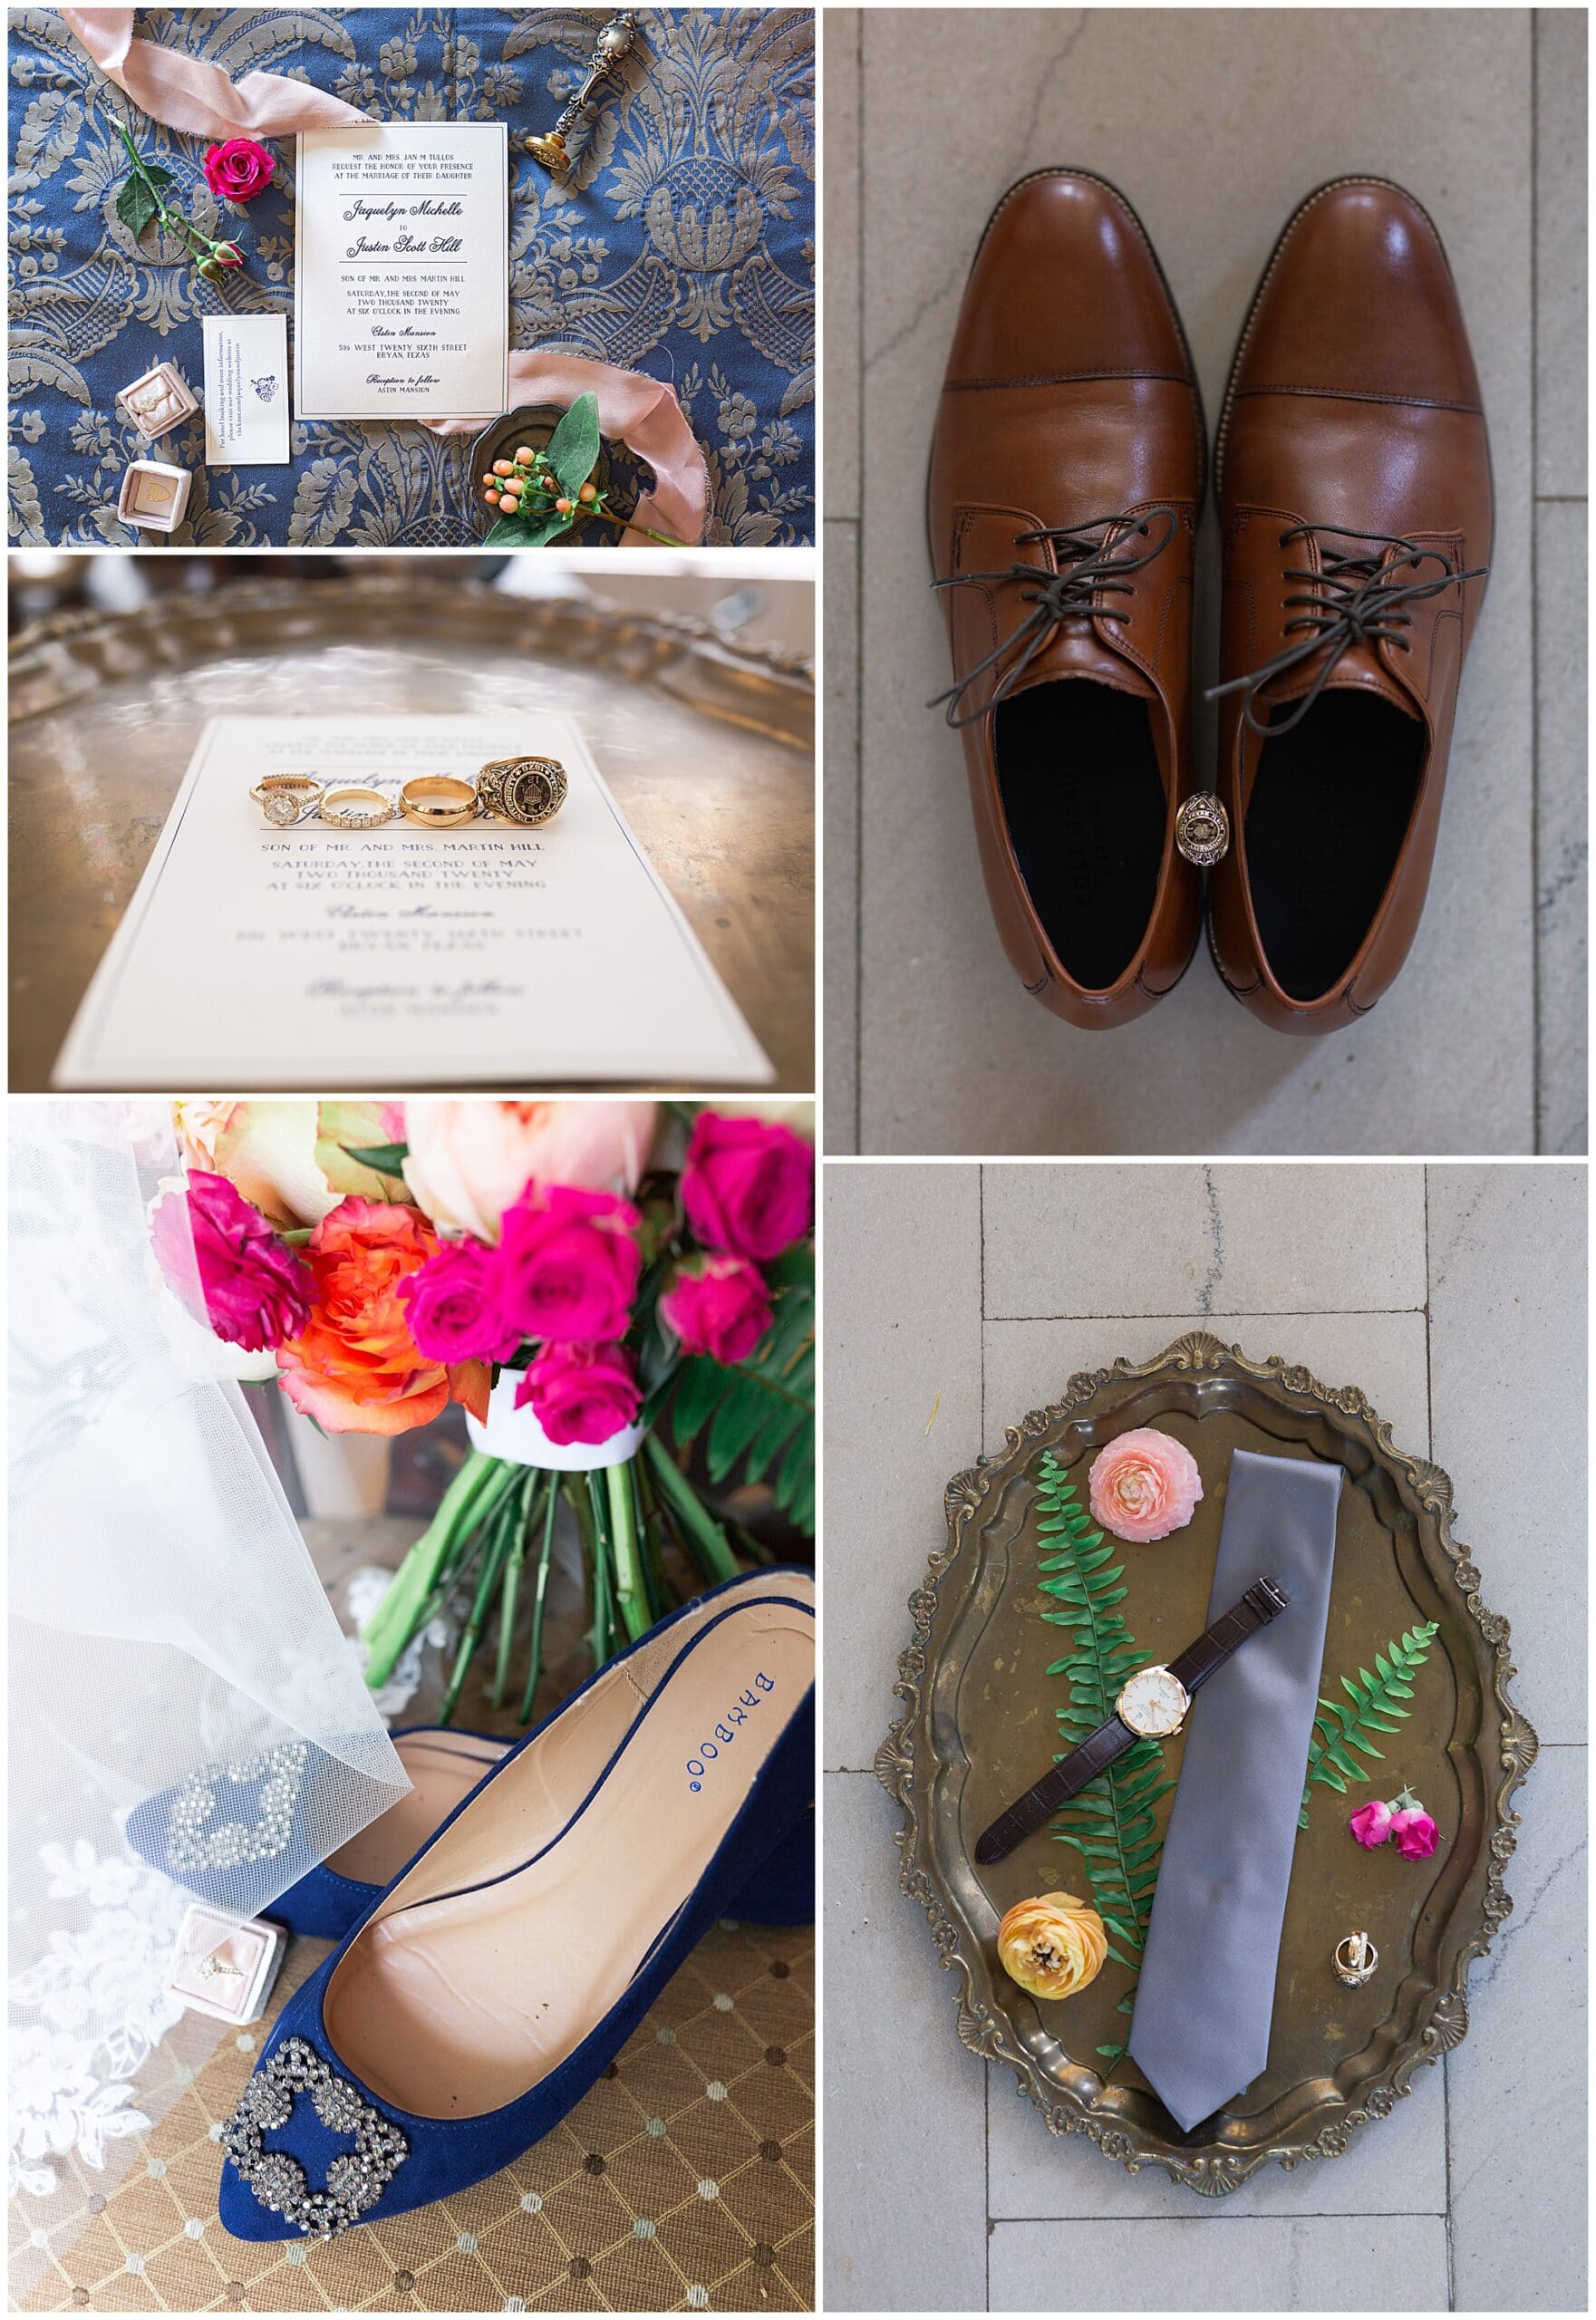 wedding invitation, shoes, tie and rings by Swish and Click Photography